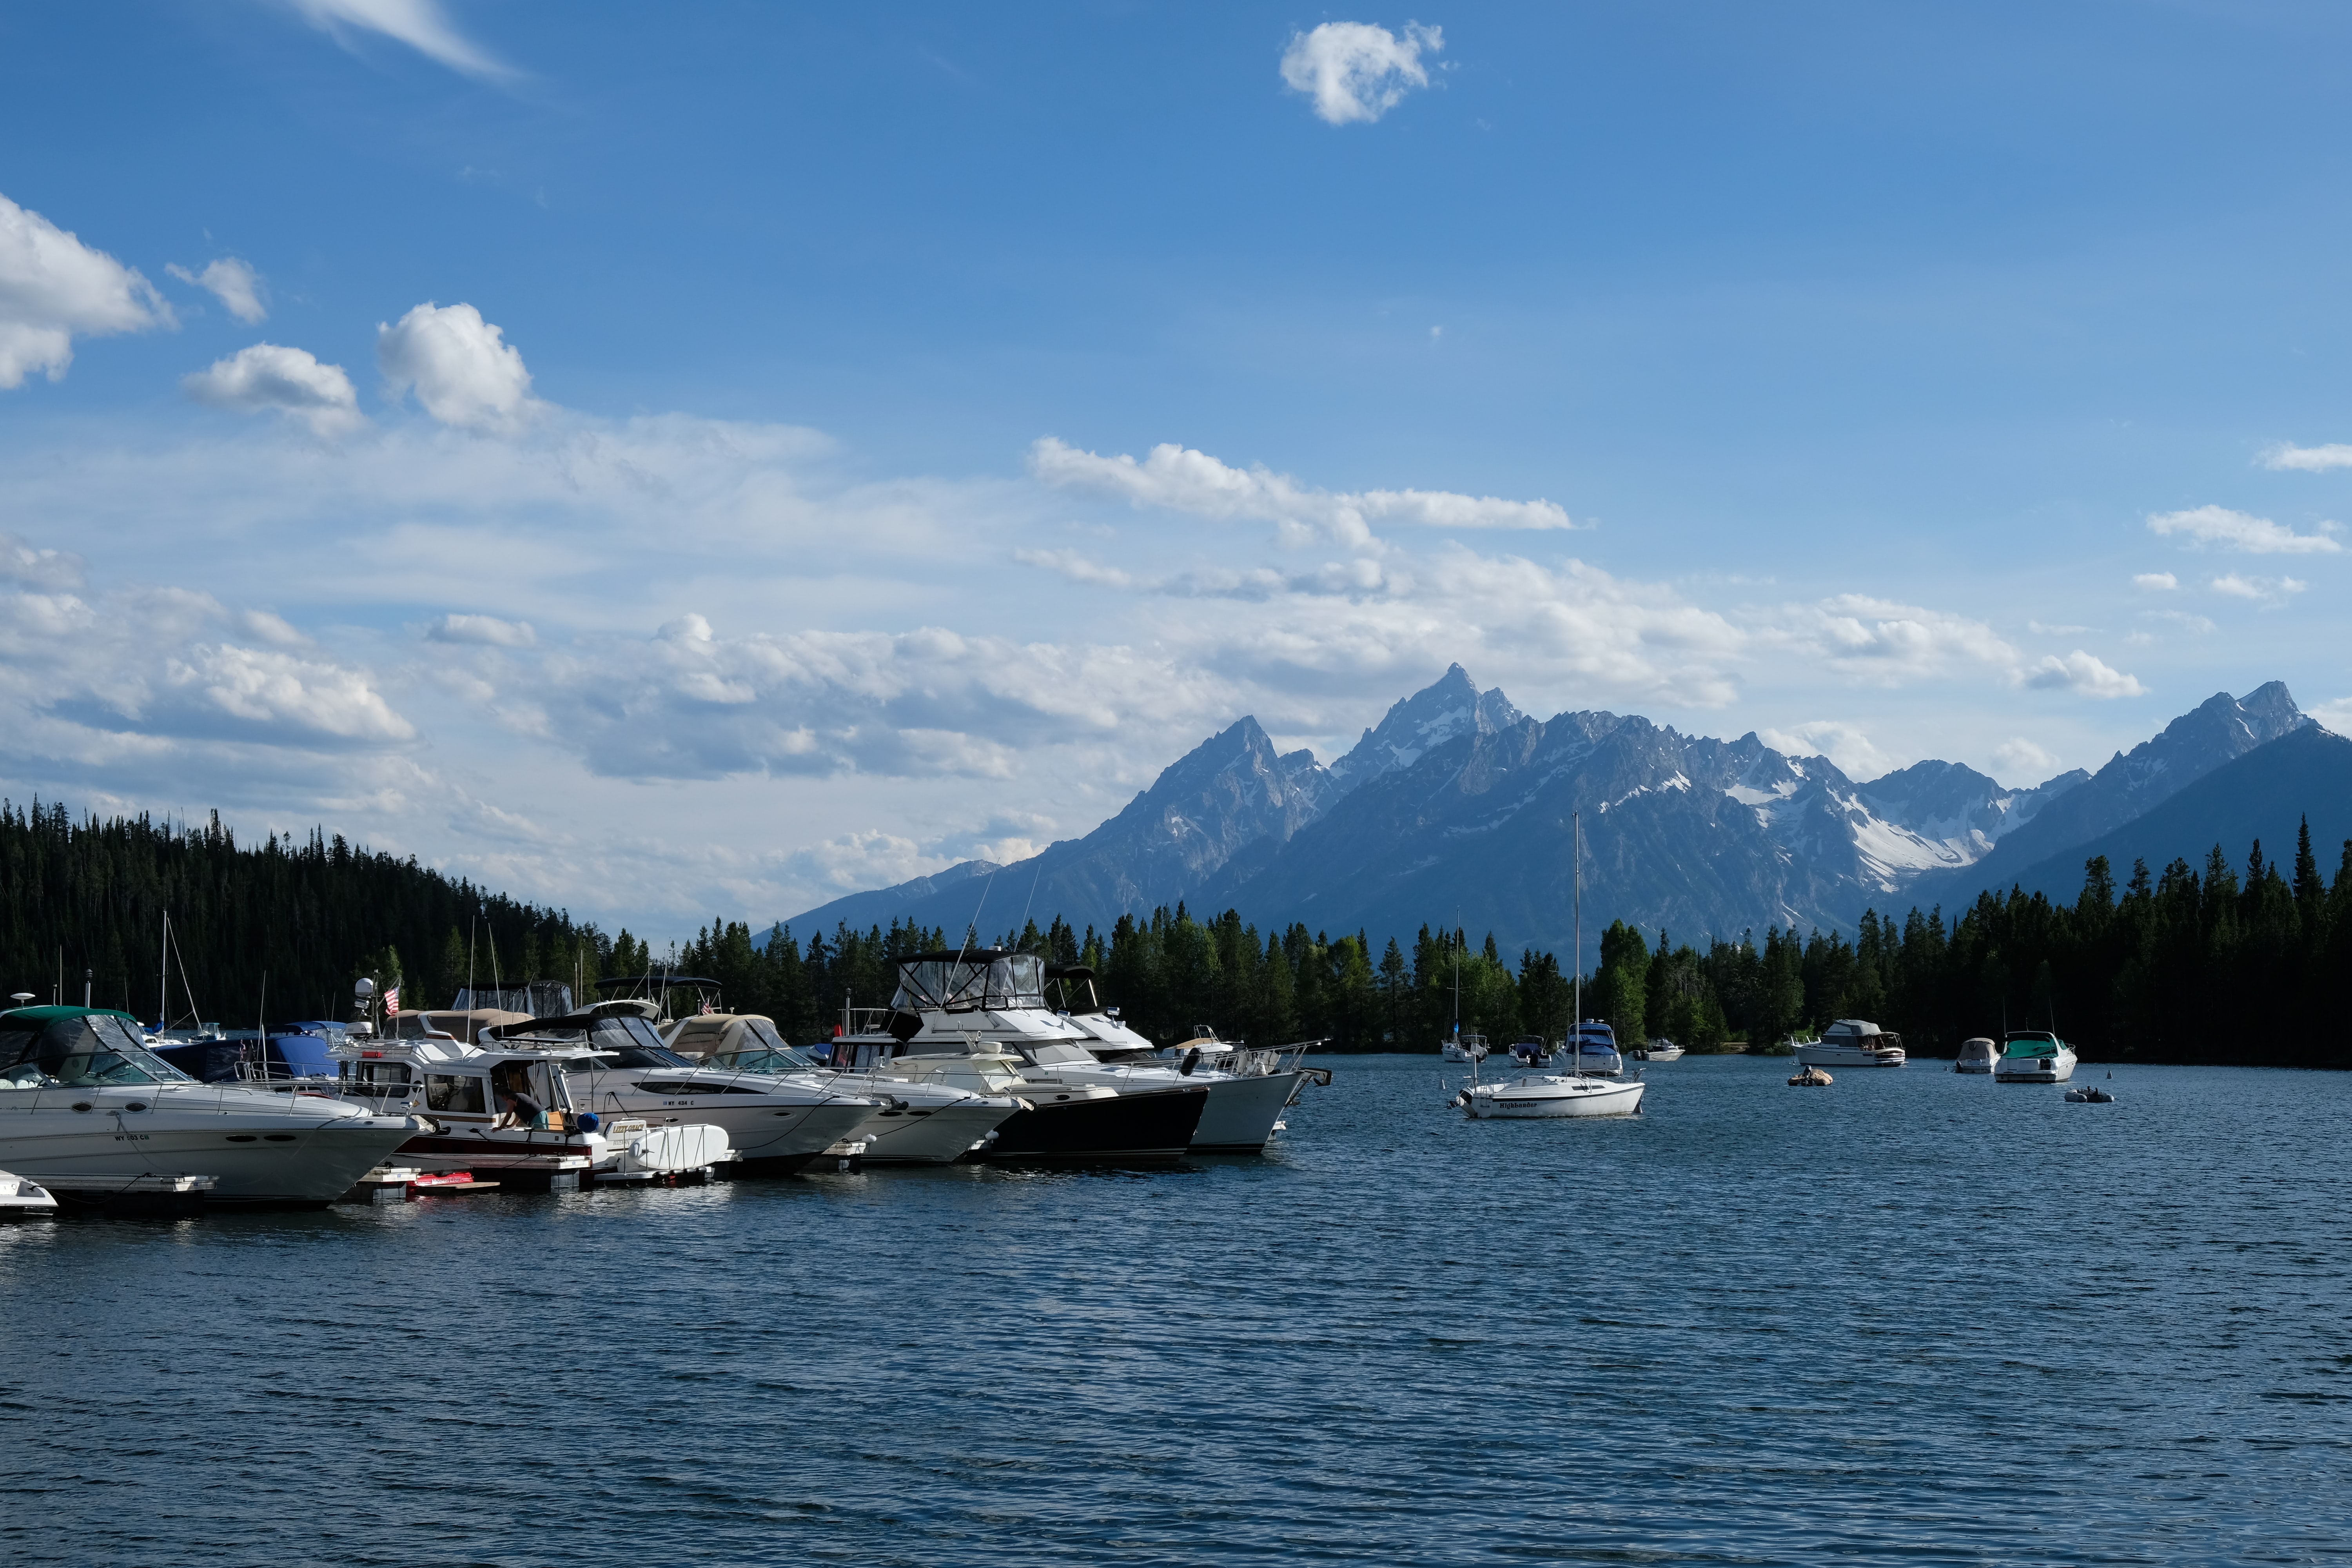 Boats docked and anchored in a lake in front of mountains in Grand Teton National Park.